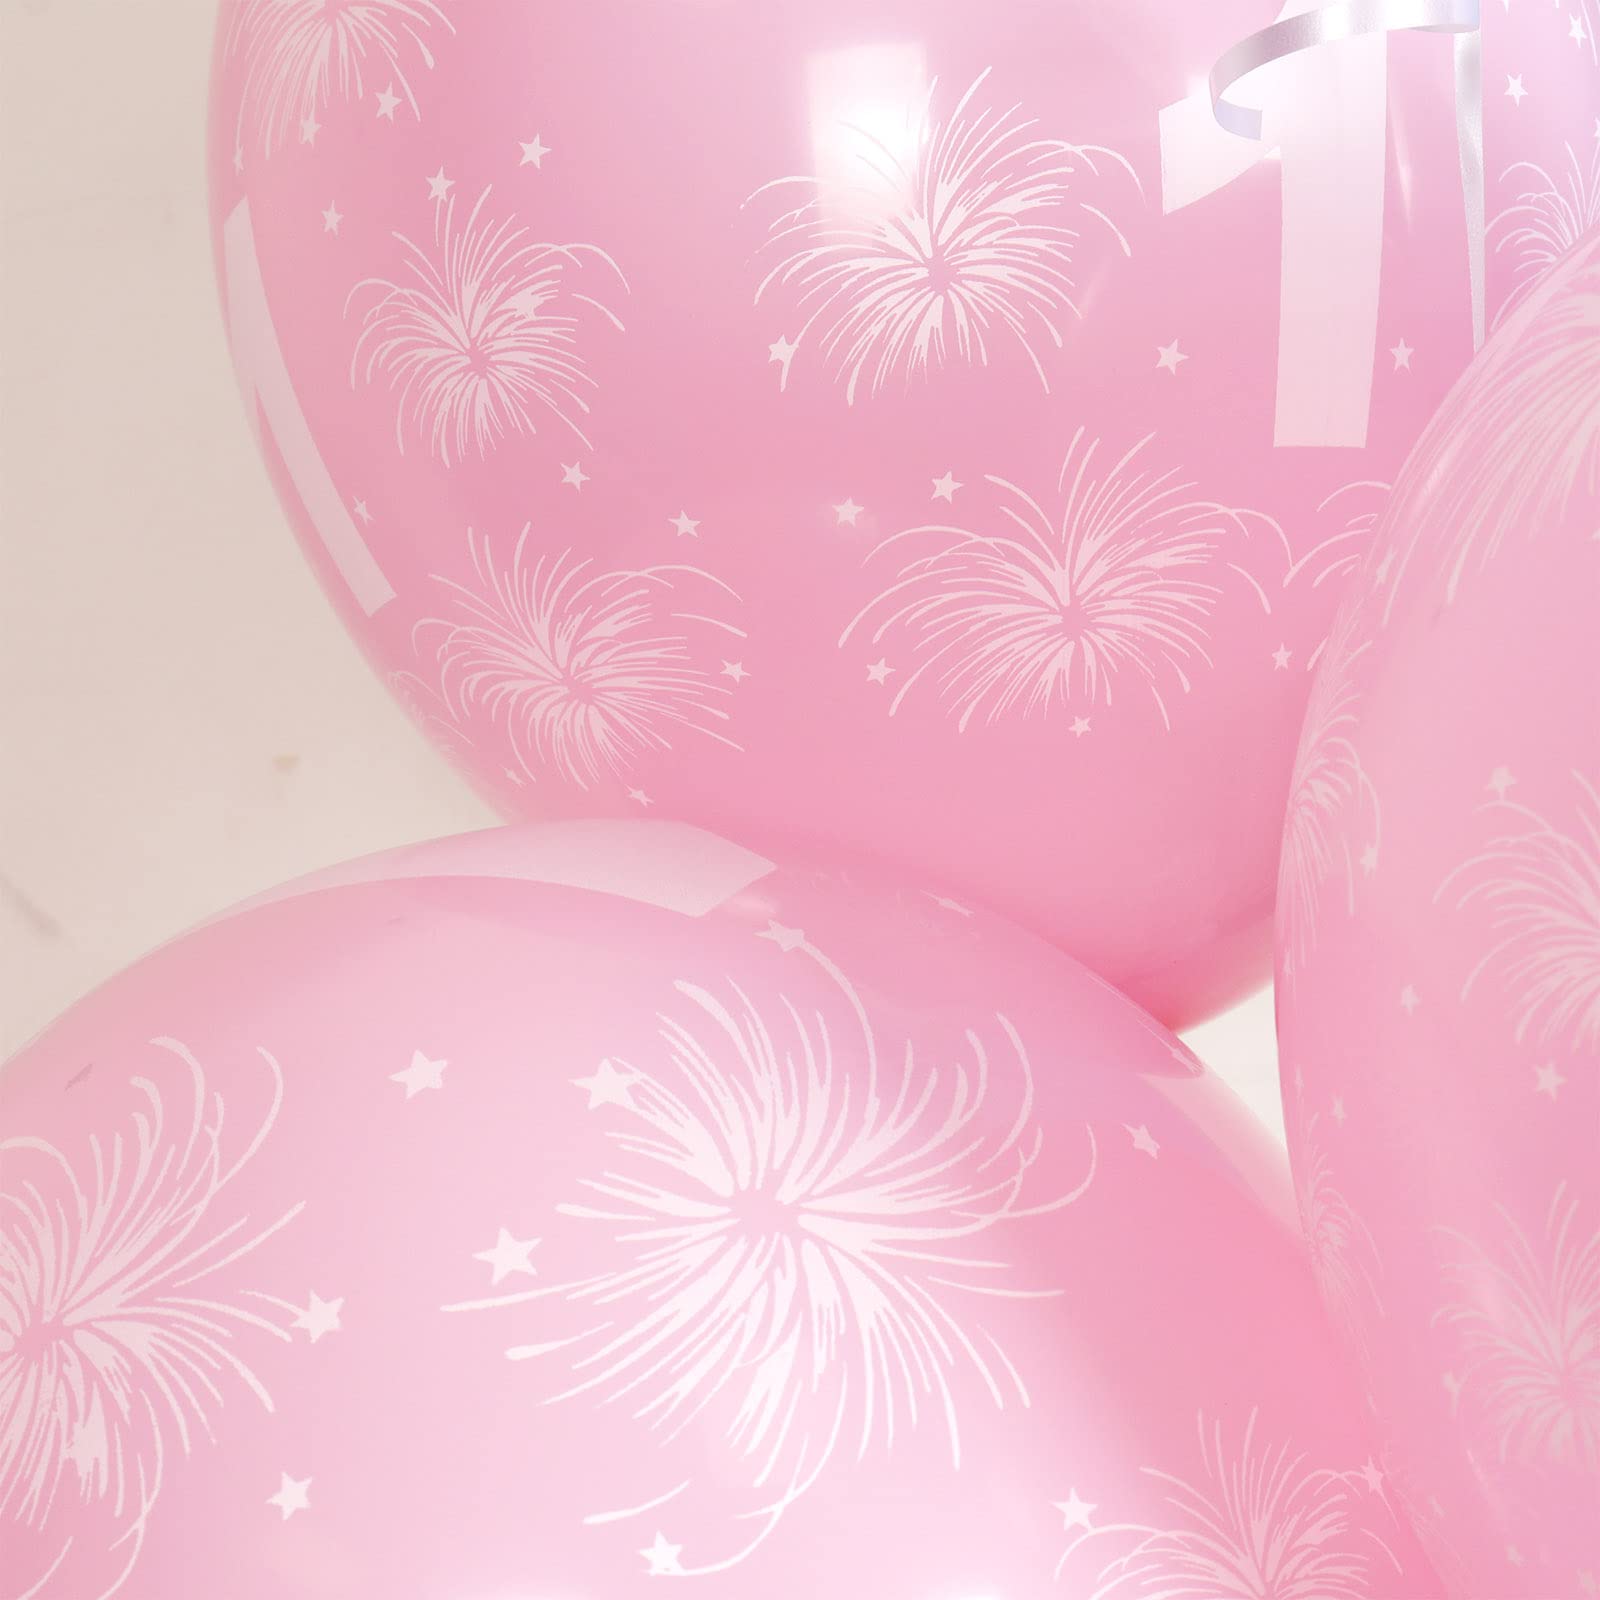 1st Birthday Balloons 12PCS, 12 inches Latex Assort Pastel Pink Baby Girl Numbers Birthday Balloon, Digit Balloons, Number 1 Age Balloons for 1 Year Old Birthday, 1st Anniversaries Party Decoration Supplies